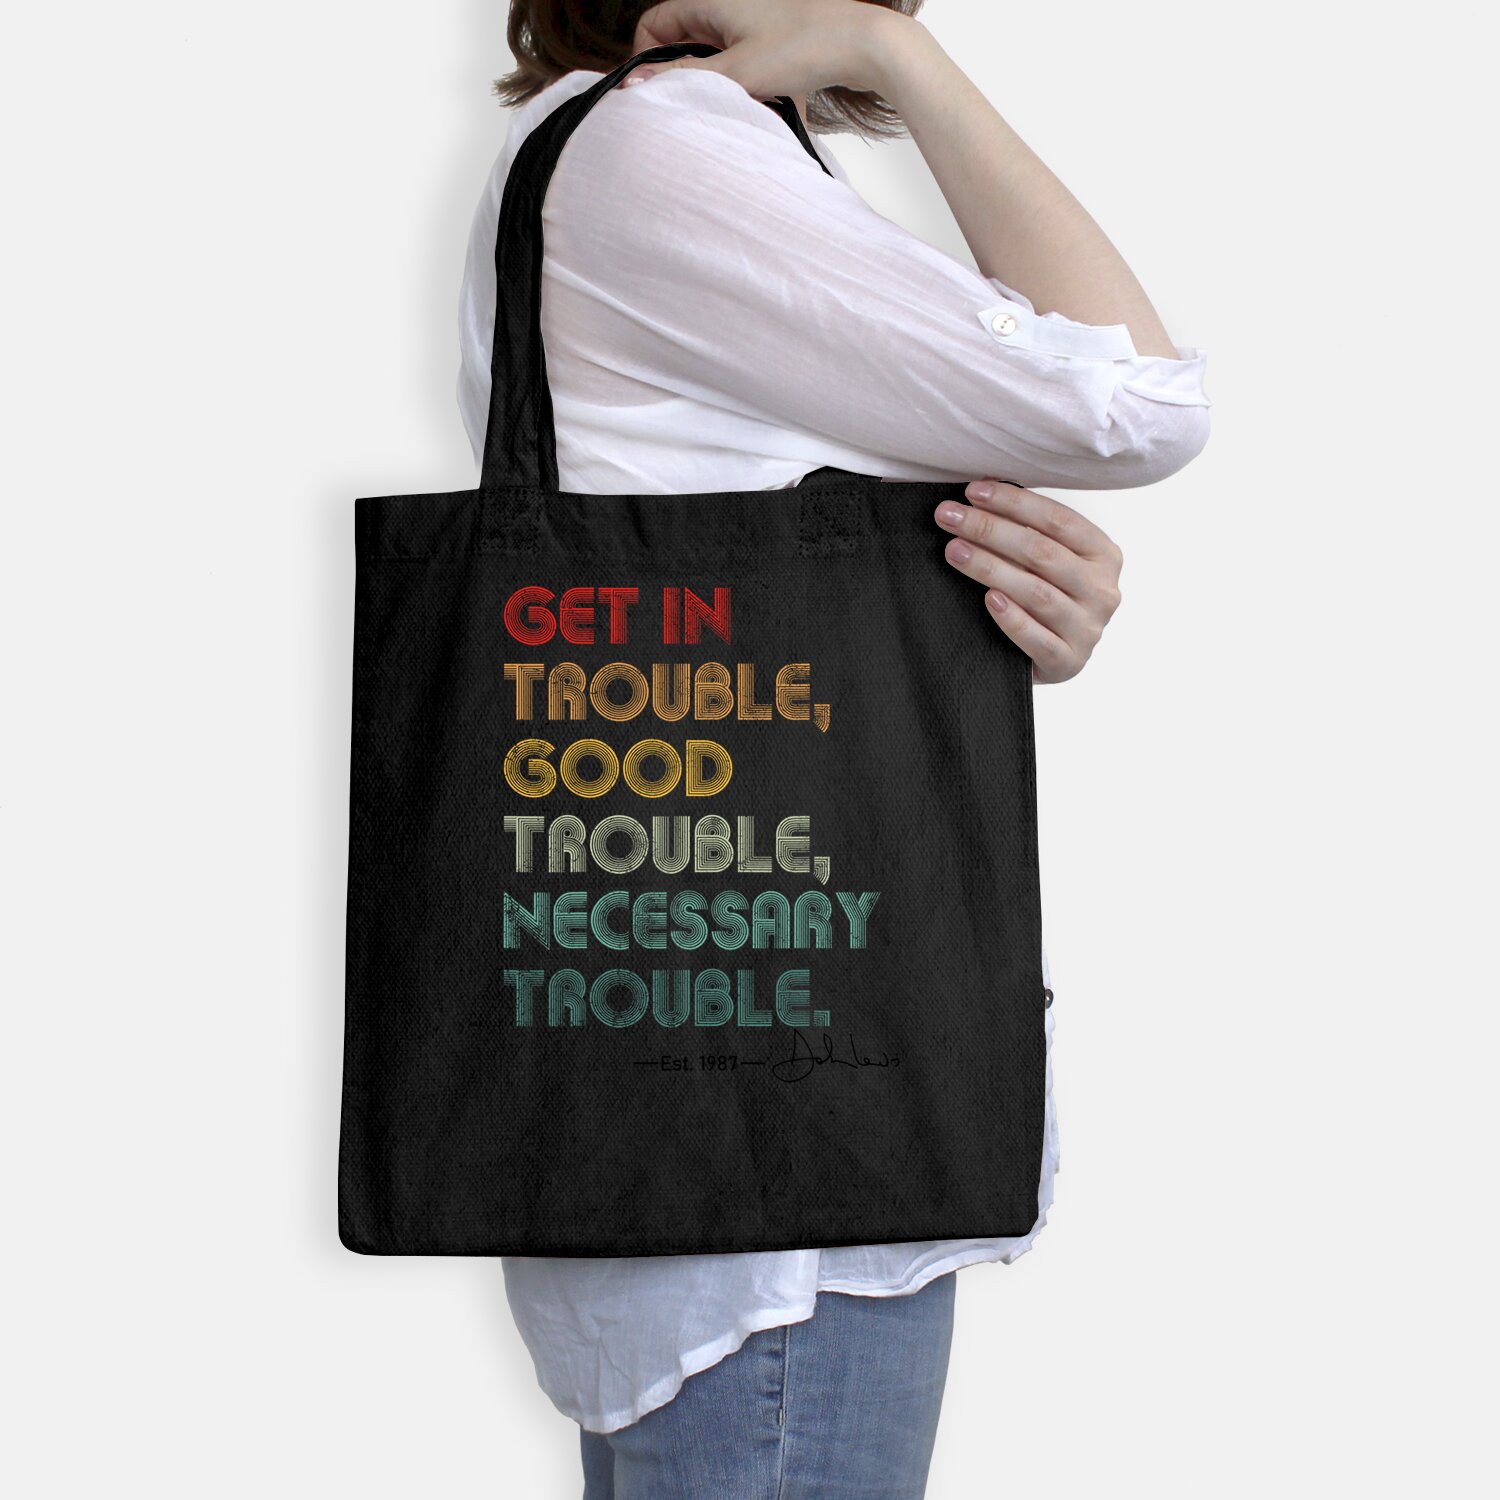 John Lewis Tee Get in Good Necessary Trouble Social Justice Tote Bag